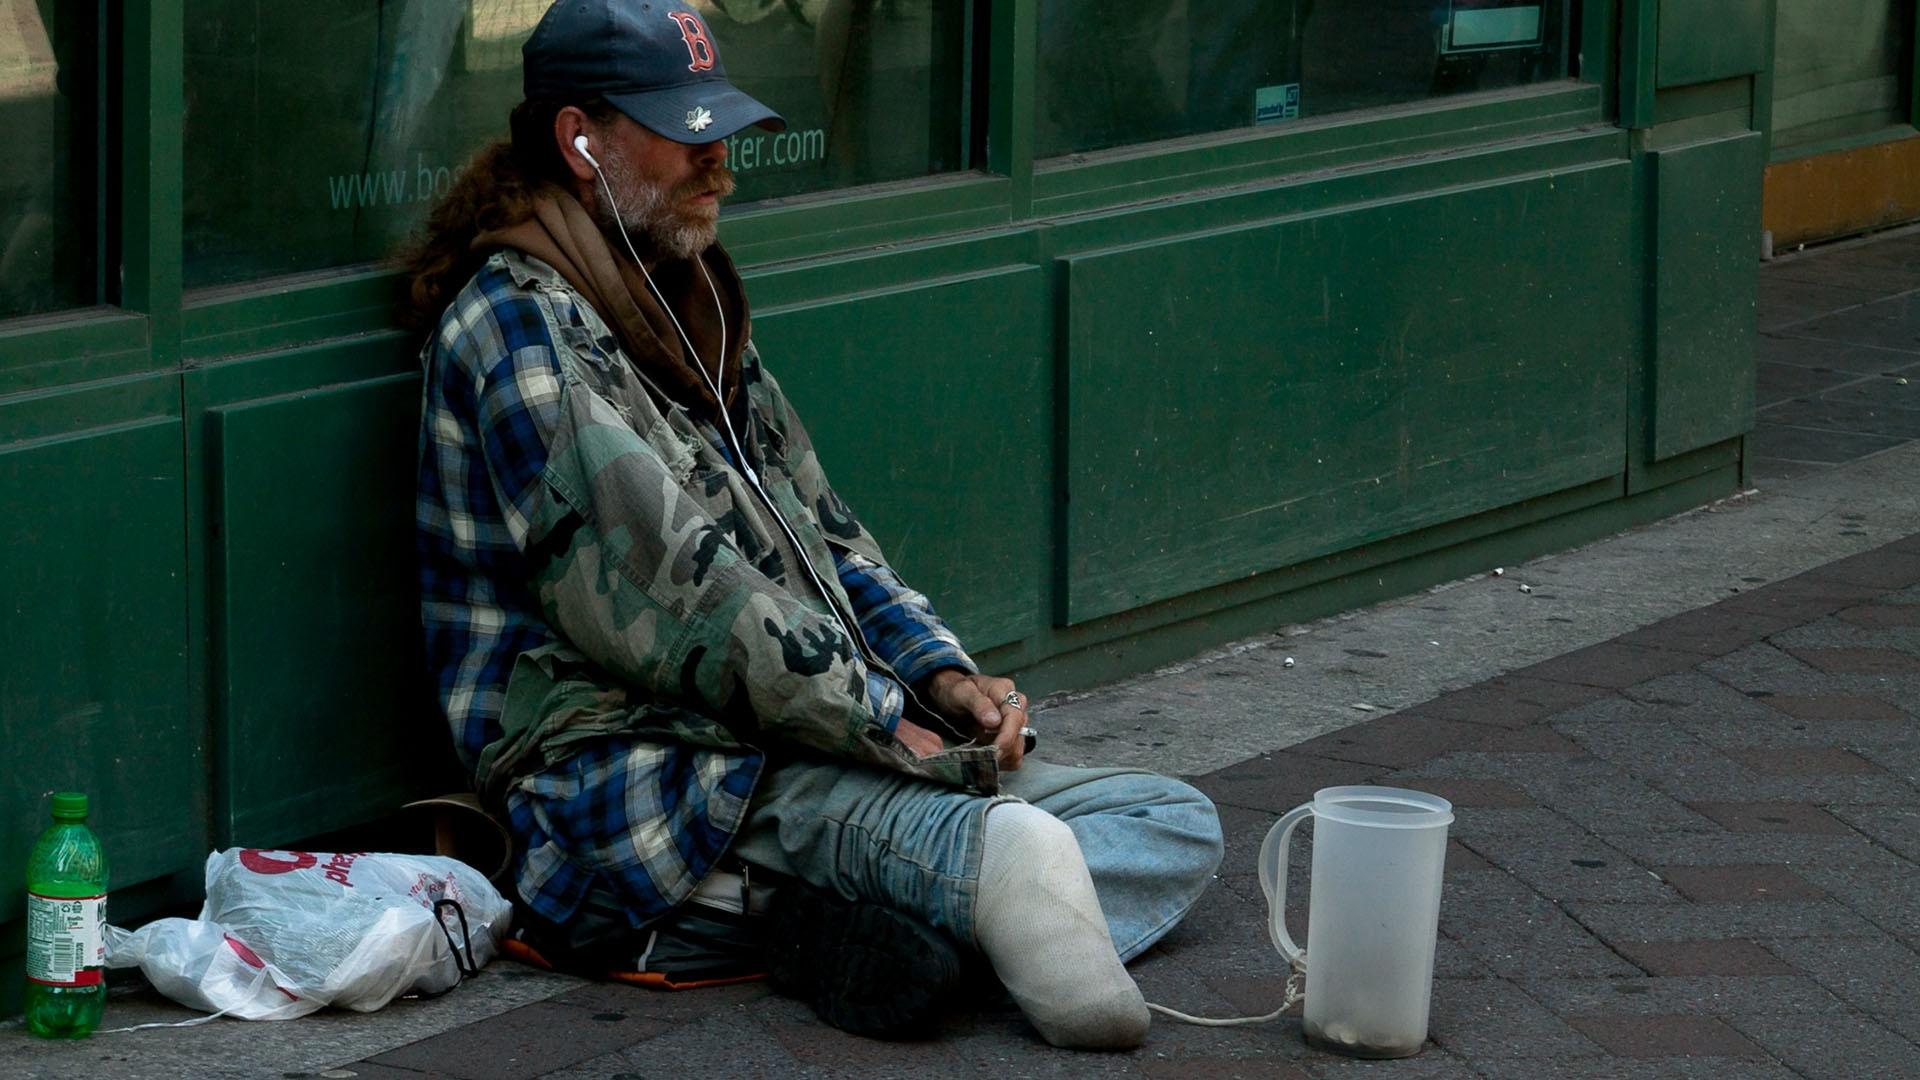 A homeless veteran looking for assistance.